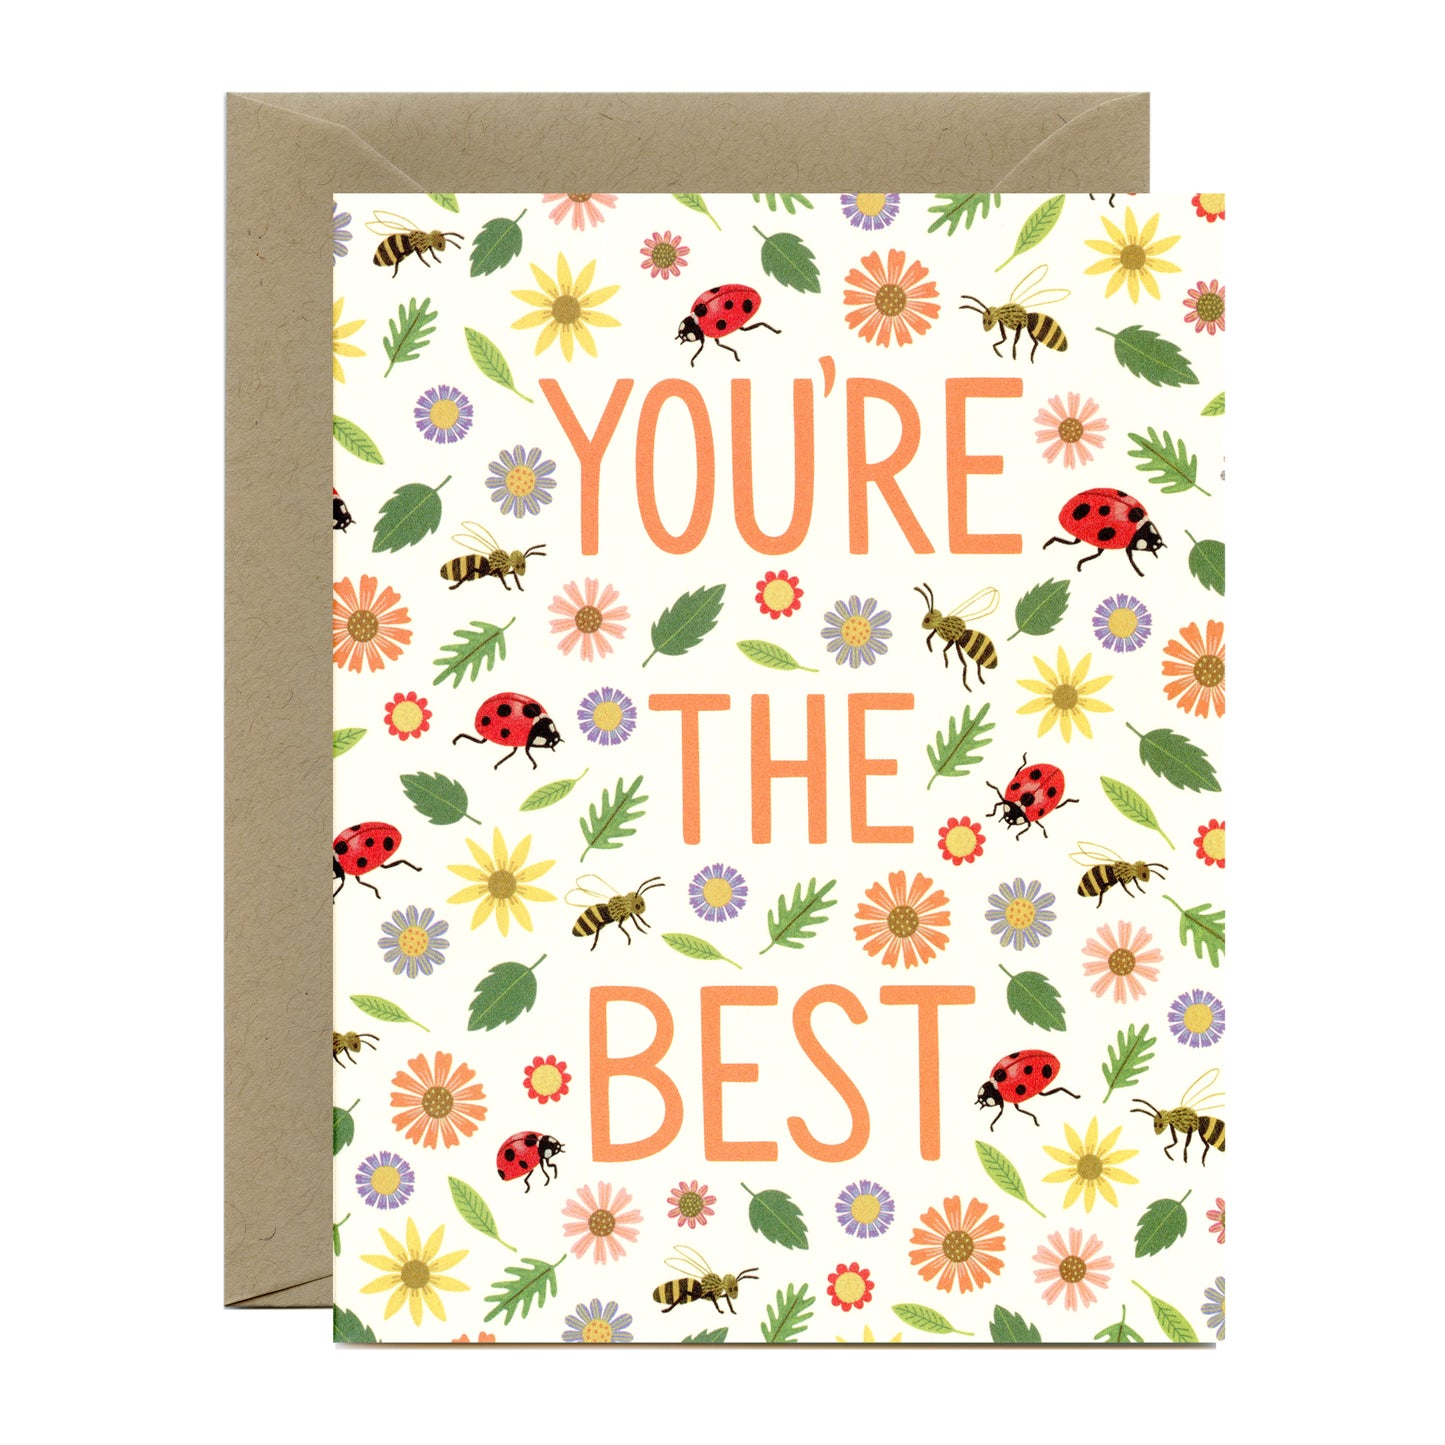 LADYBUGS, BUMBLE BEES AND FLOWERS - THANK YOU GREETING CARDS, BOXED SET OF 8